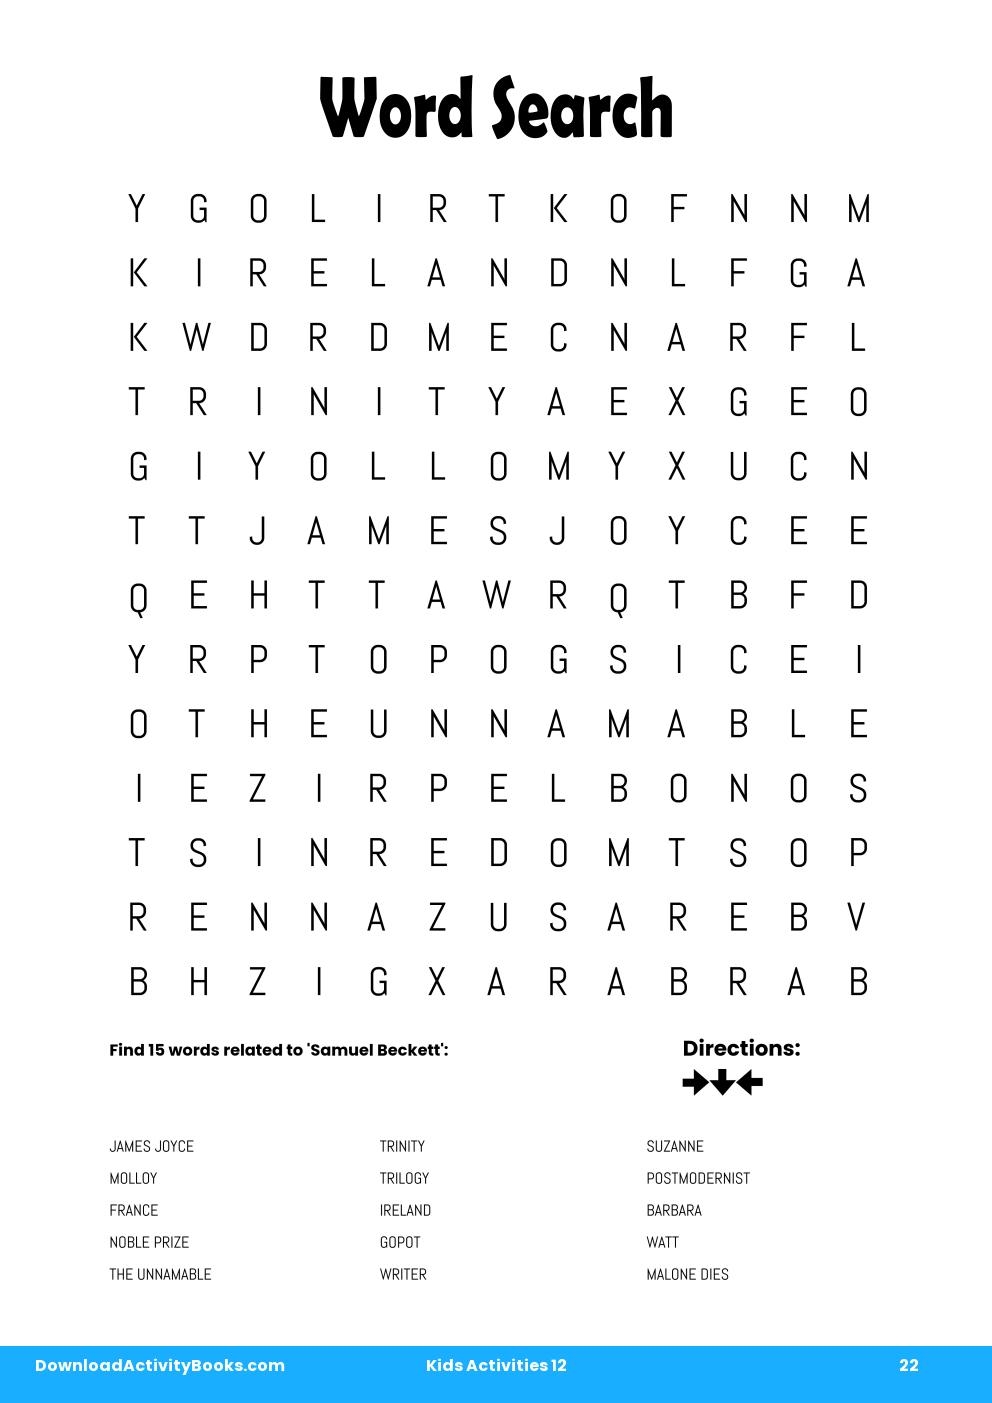 Word Search in Kids Activities 12